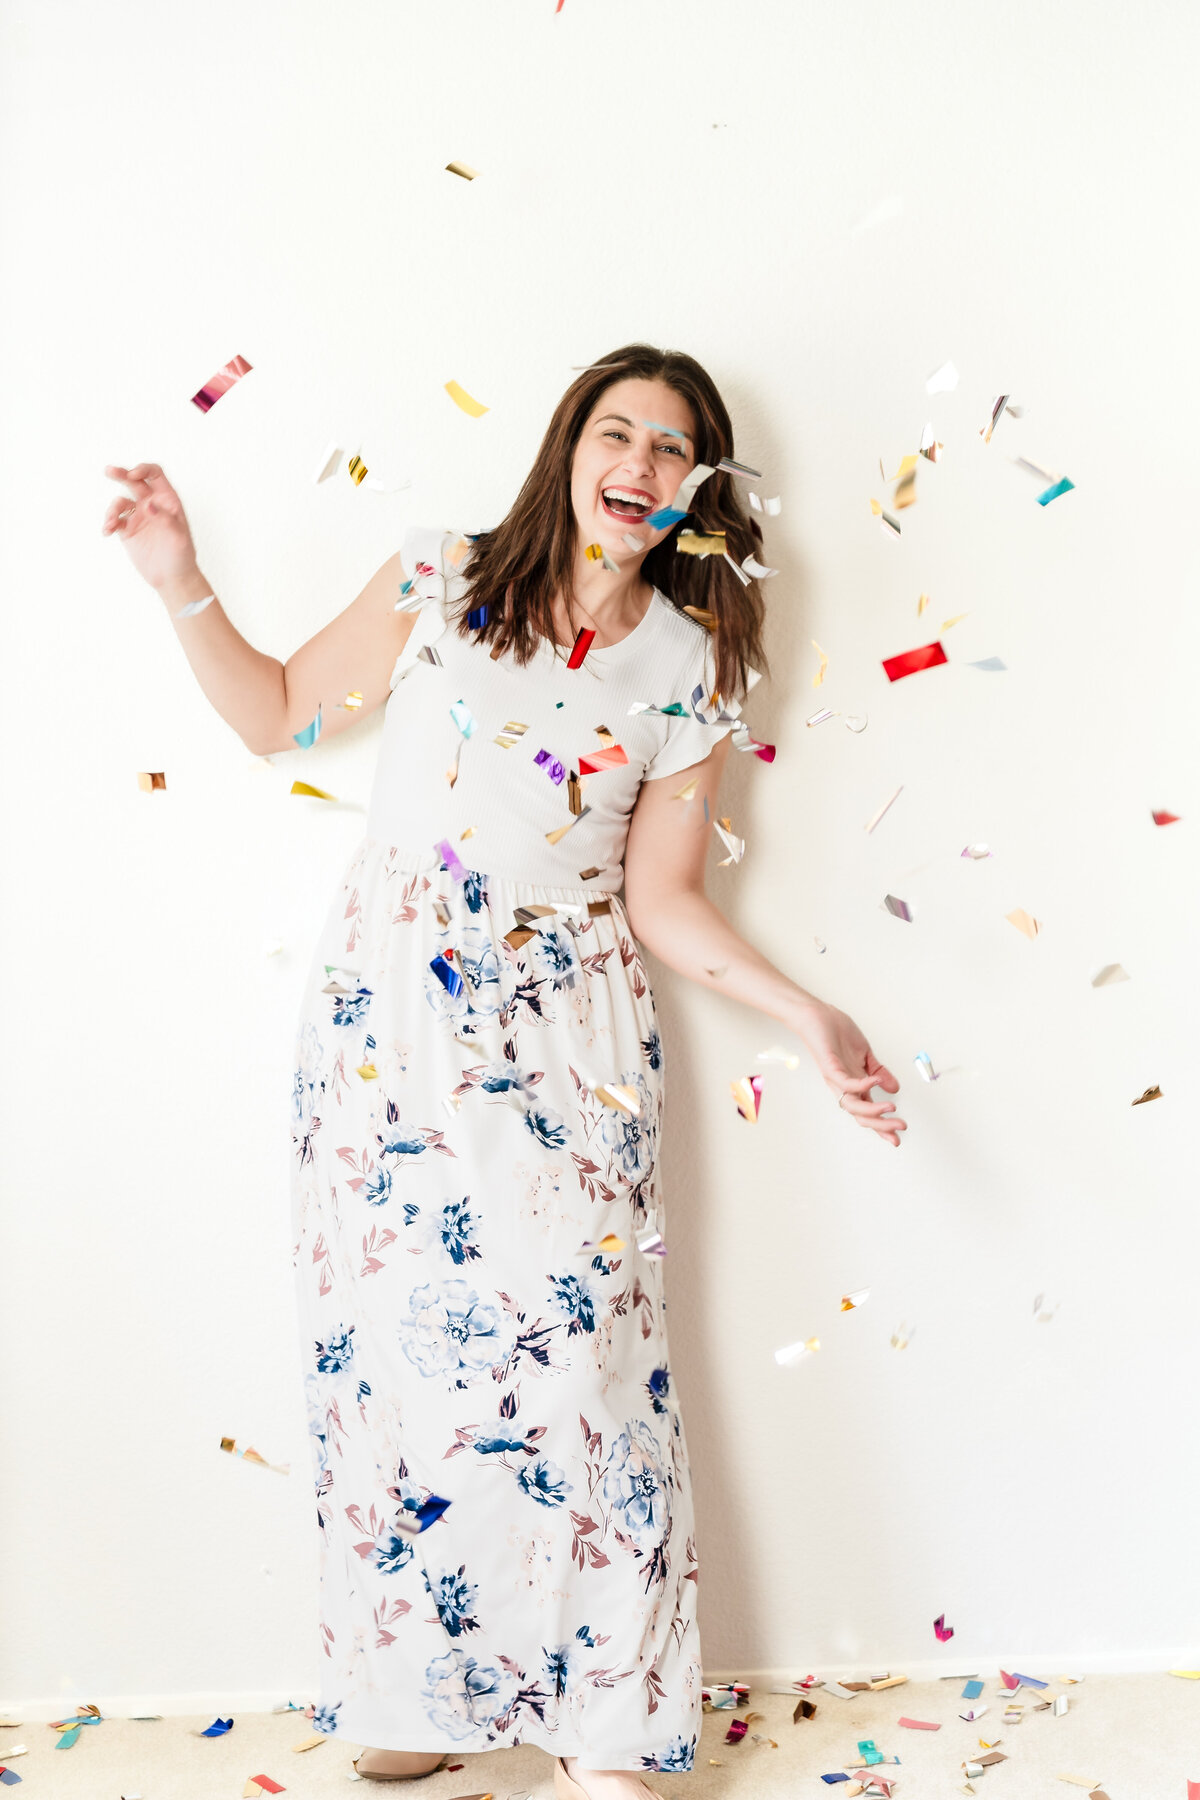 brand photo of a woman celebrating with confetti